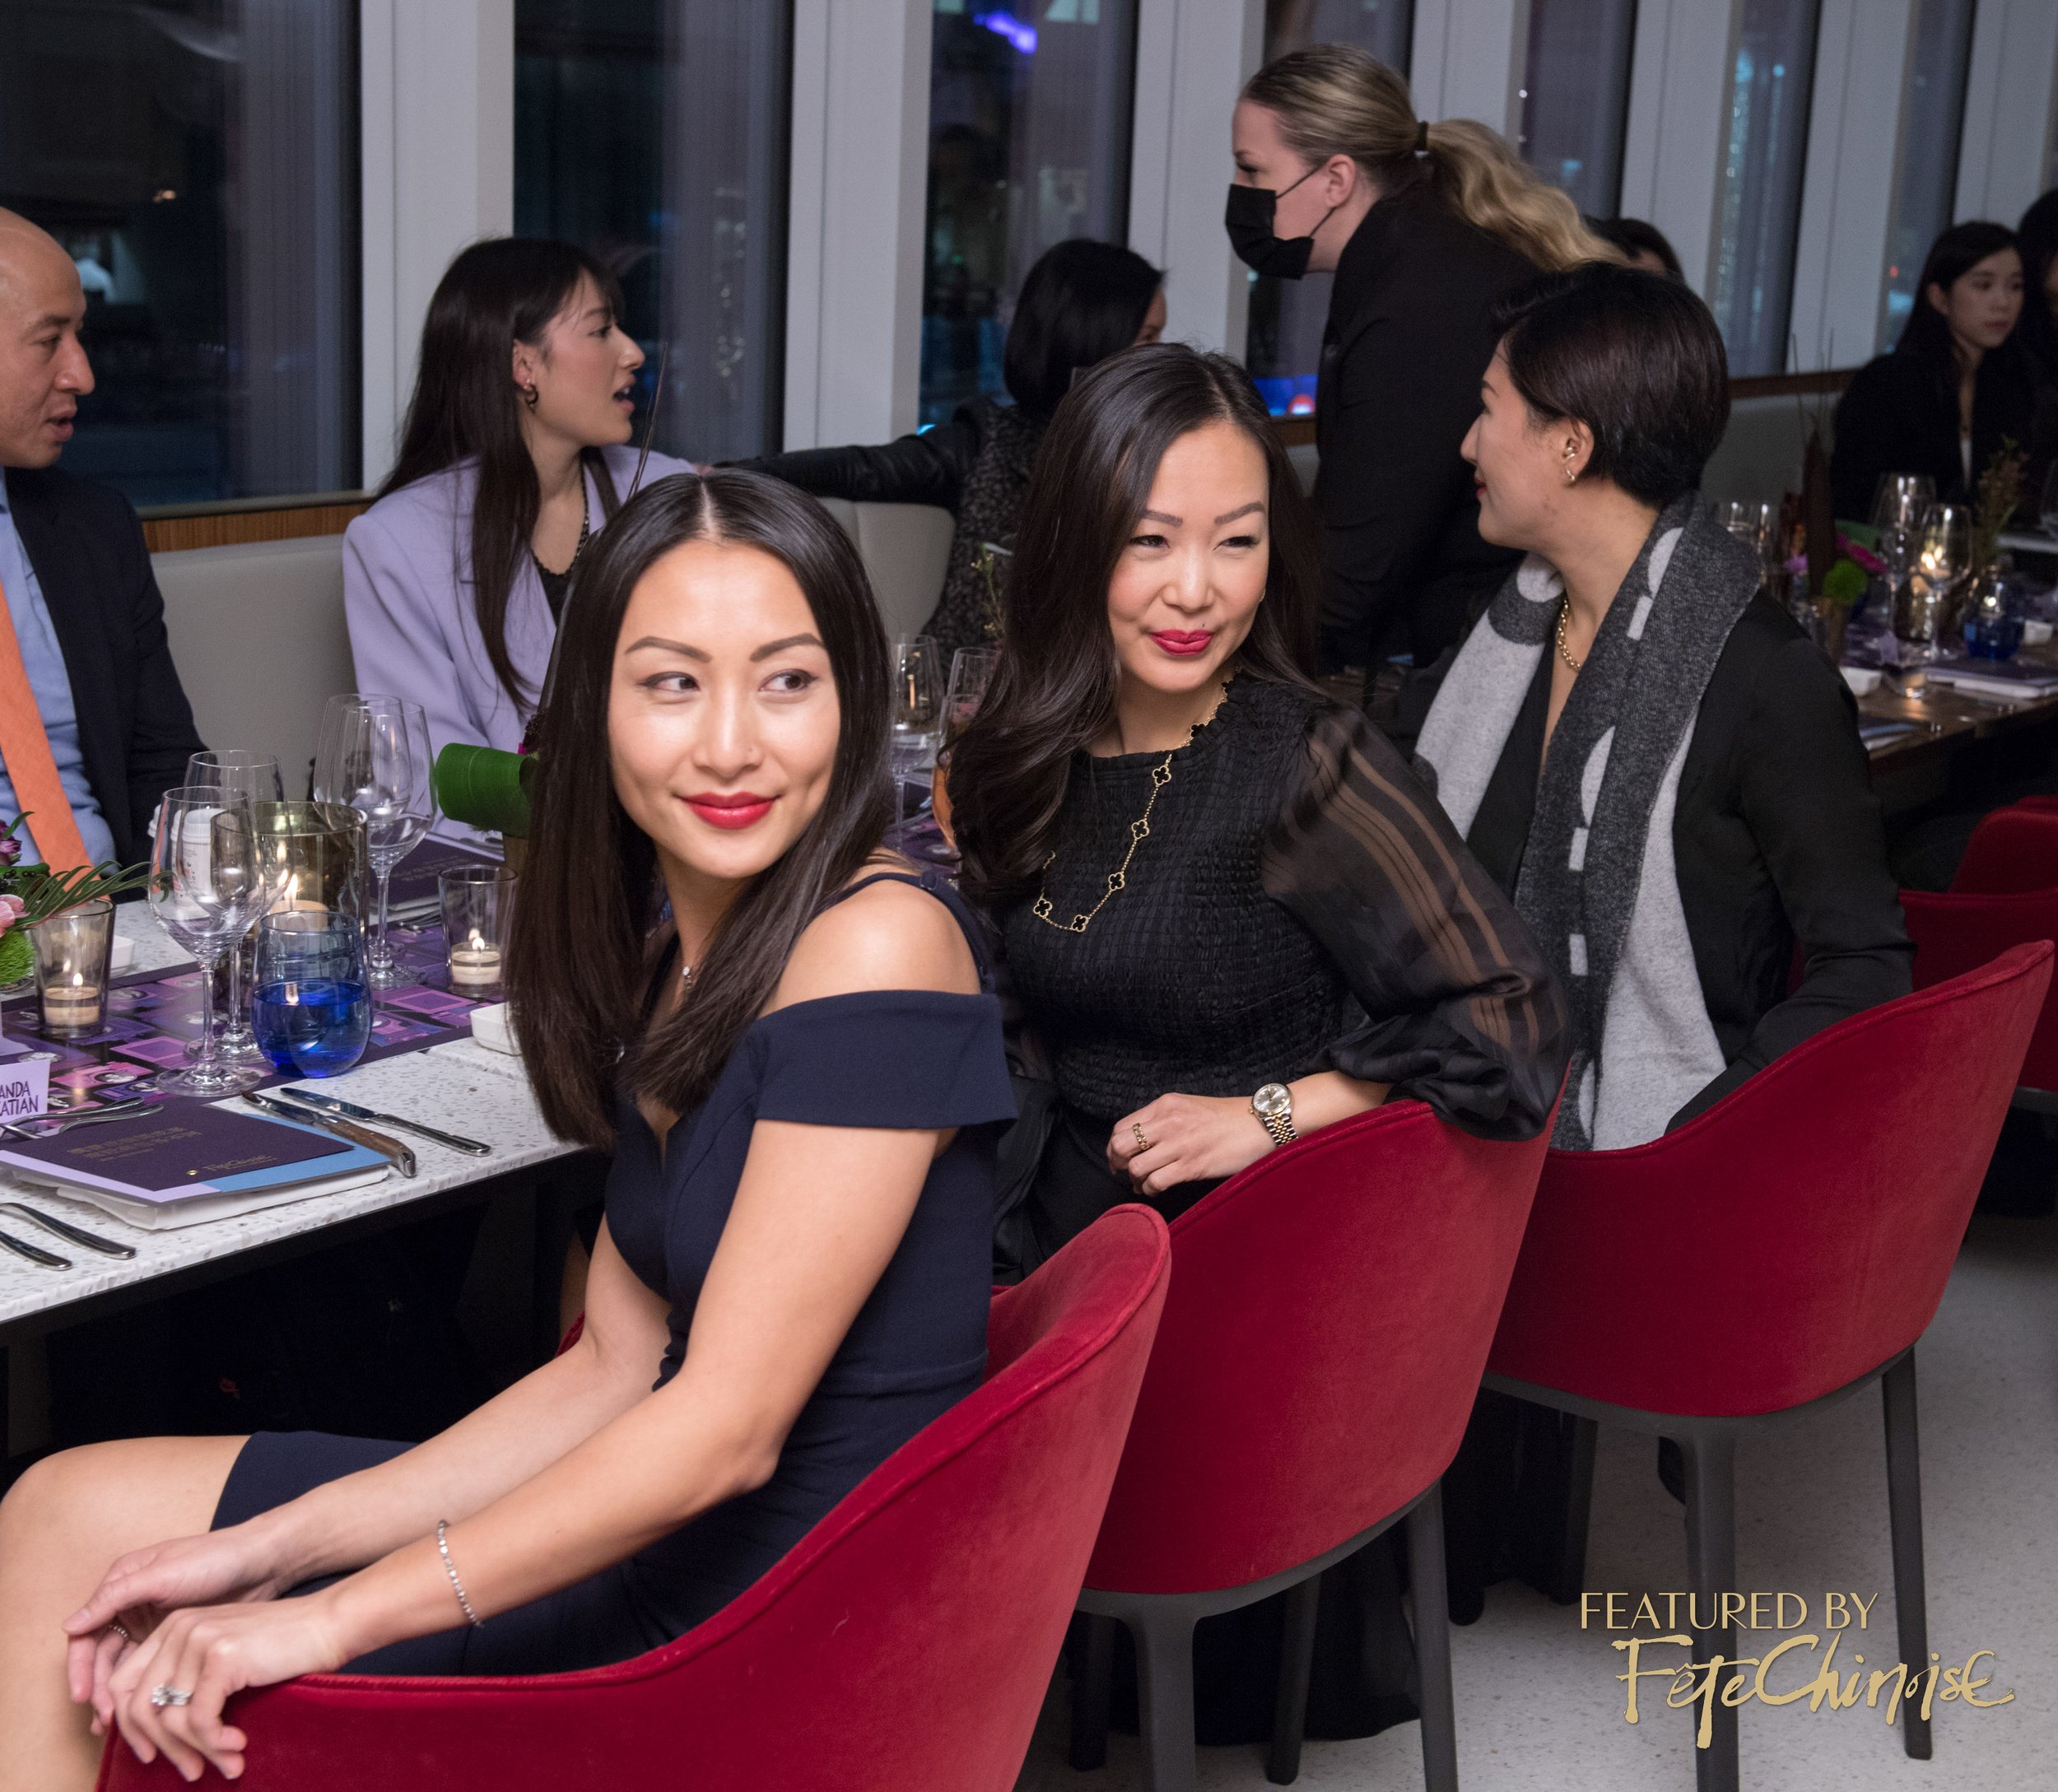 Fete-Chionise-Magaine-edition7-launch-party-holt-renfrew-photography-release-26.jpg